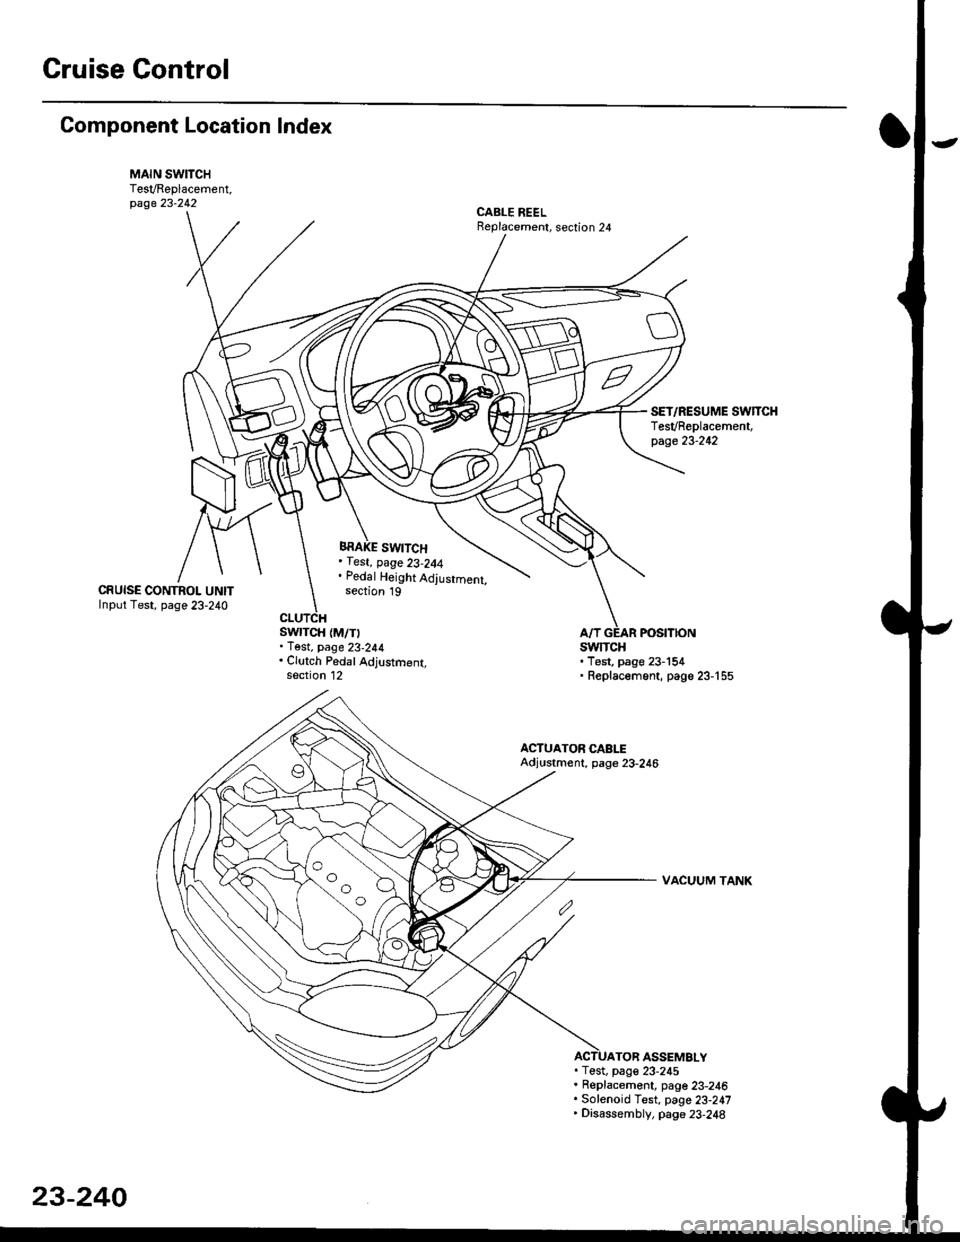 HONDA CIVIC 1996 6.G Owners Manual Gruise Control
Component Location Index
MAIN SWITCHTesVReplacement,page 23-242CABLE REELReplacement, section 24
BRAKE SWITCH, fest, page 23-244. Pedal Height Adjustment,section 19CRUISE CONTROI. UNITI